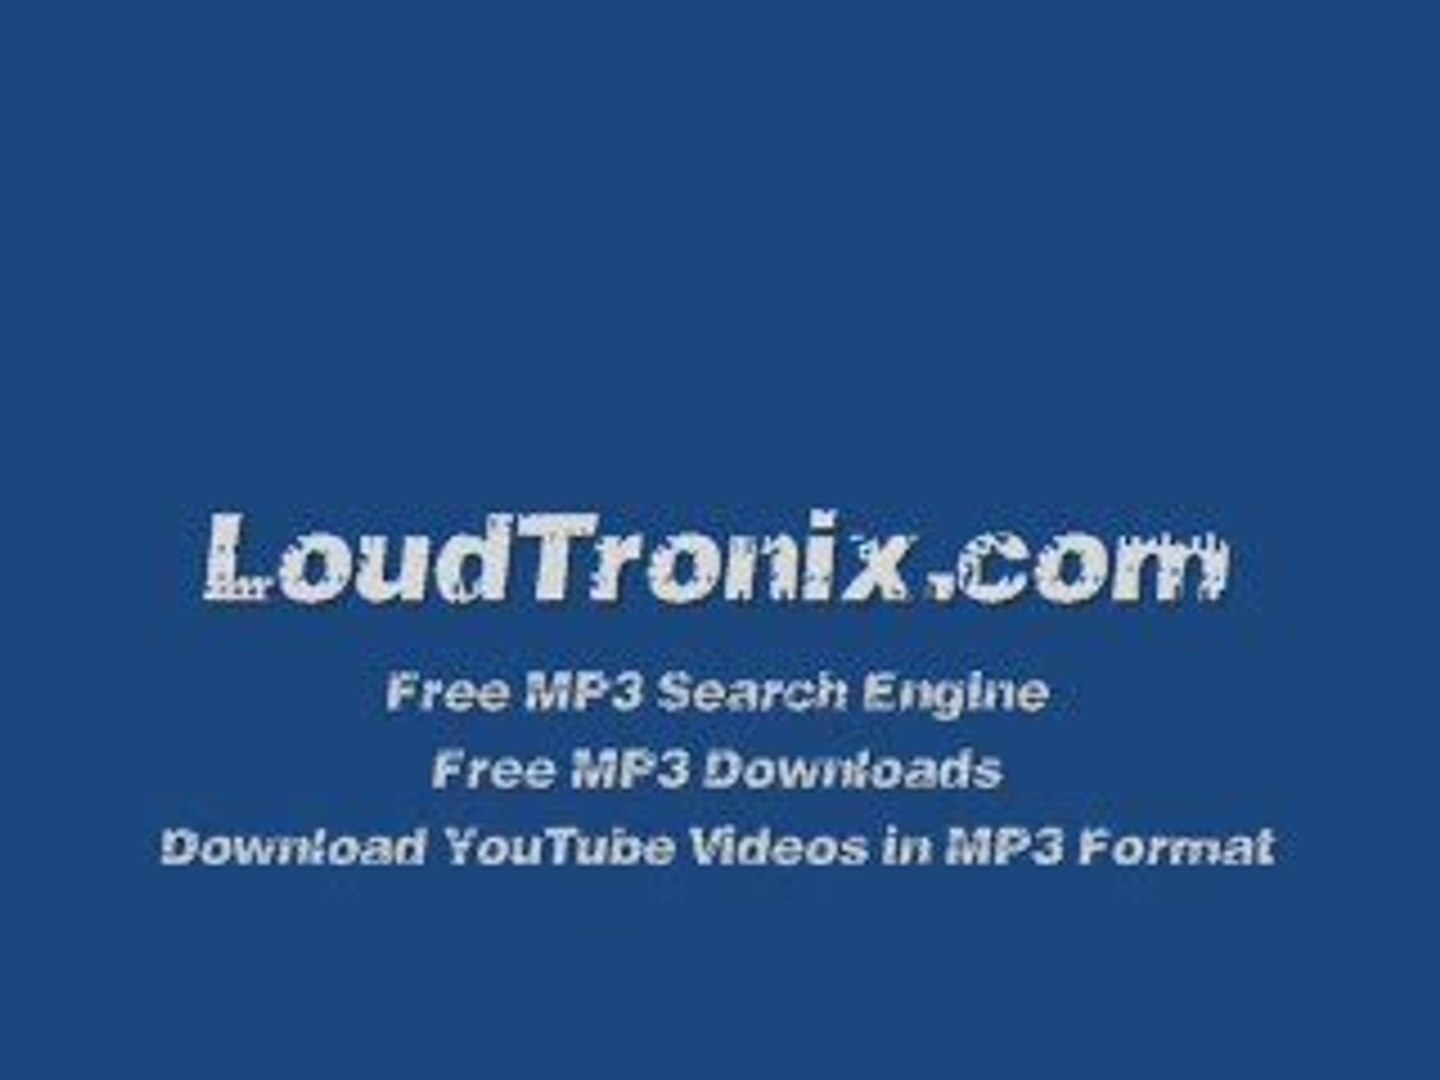 Free MP3 Search Engine & Downloads - LoudTronix.com - video Dailymotion